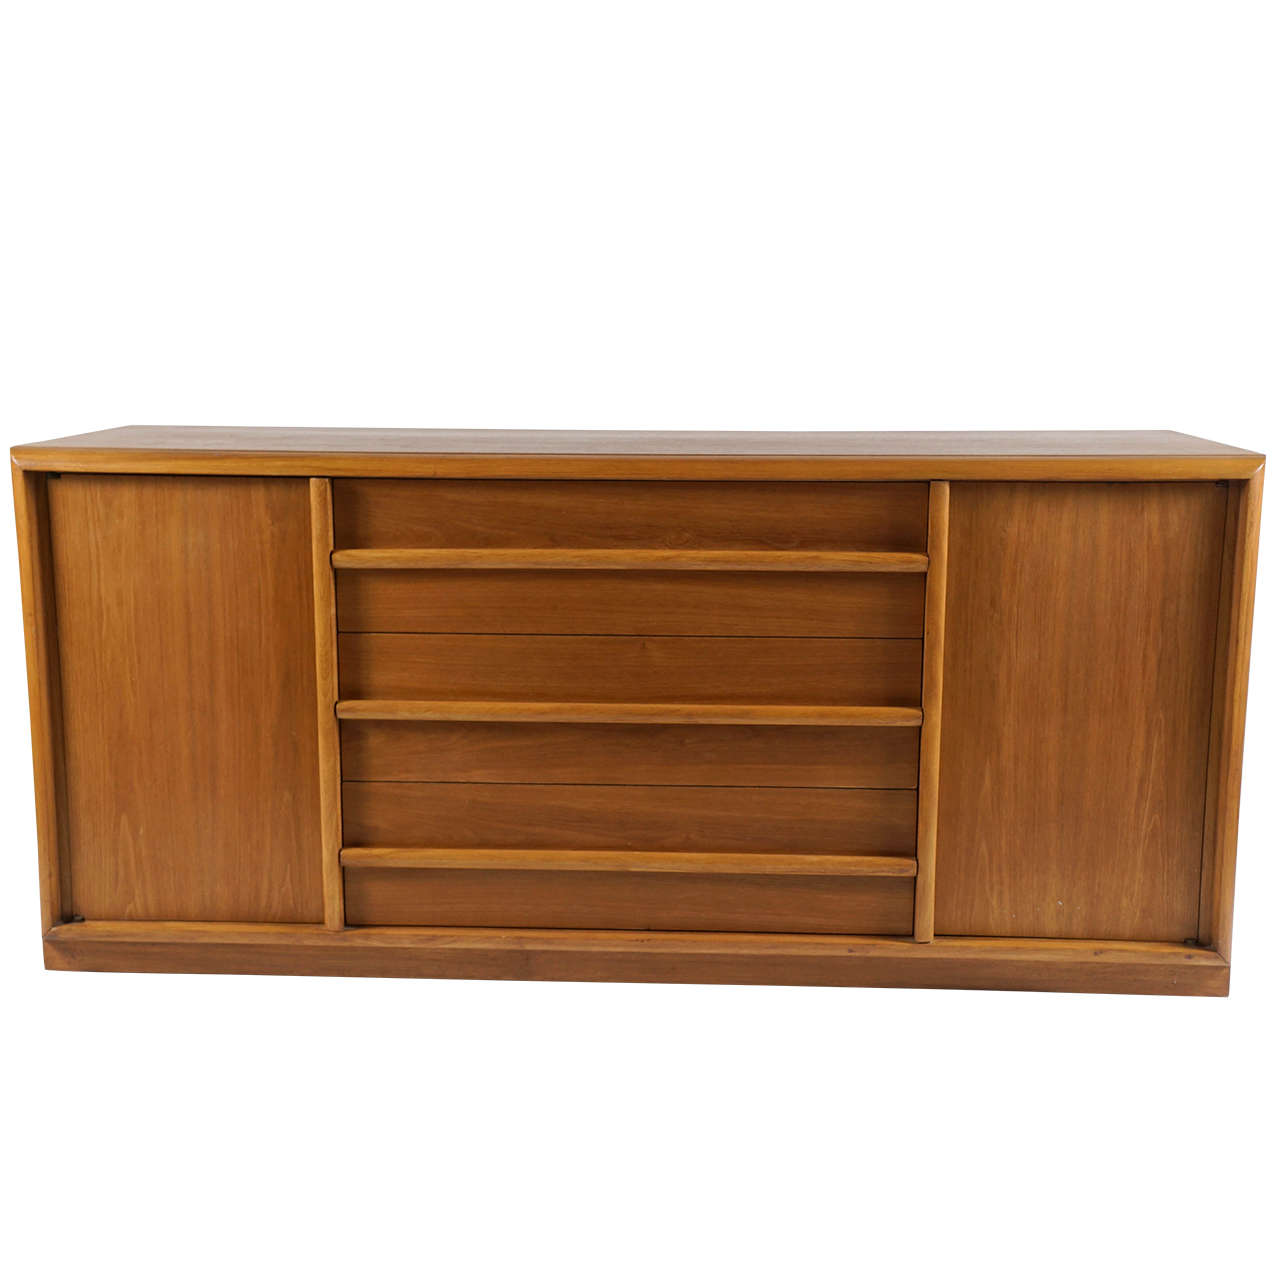 Credenza or Sideboard by Robsjohns-Gibbings for Widdicomb